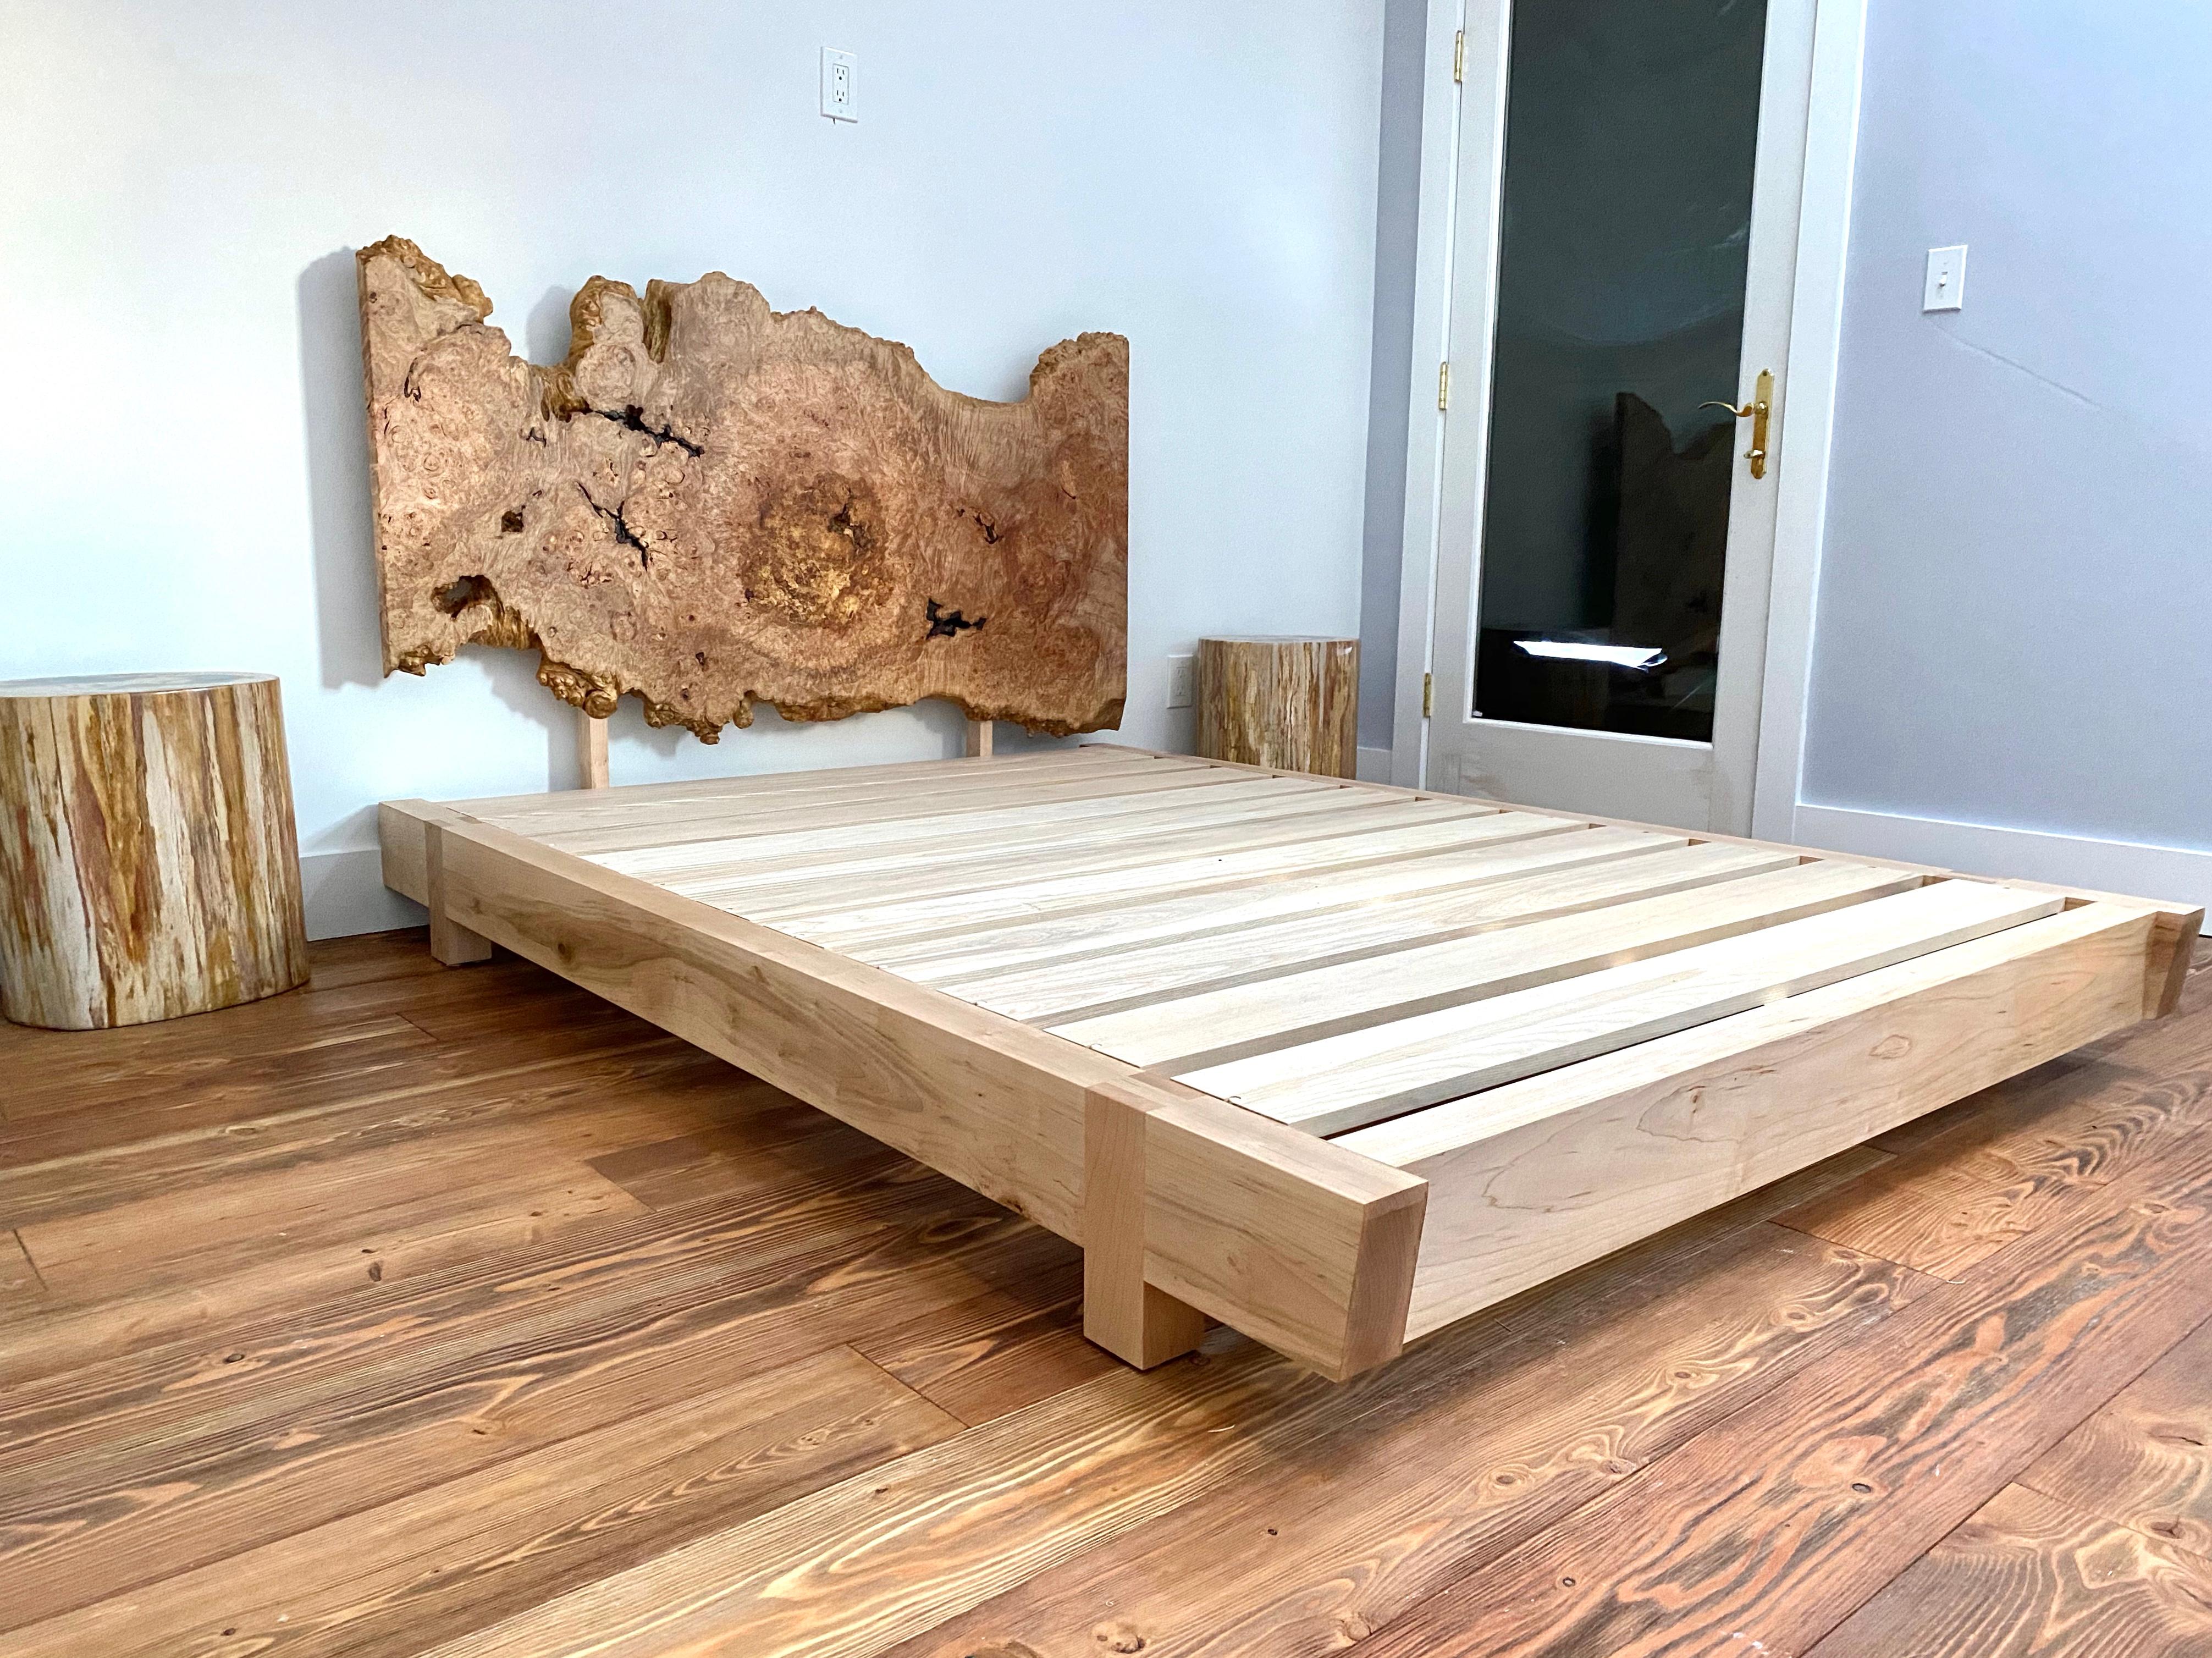 American Black Walnut Perri Bed Queen-sized with Sustainable Live-edge Slab Headboard For Sale